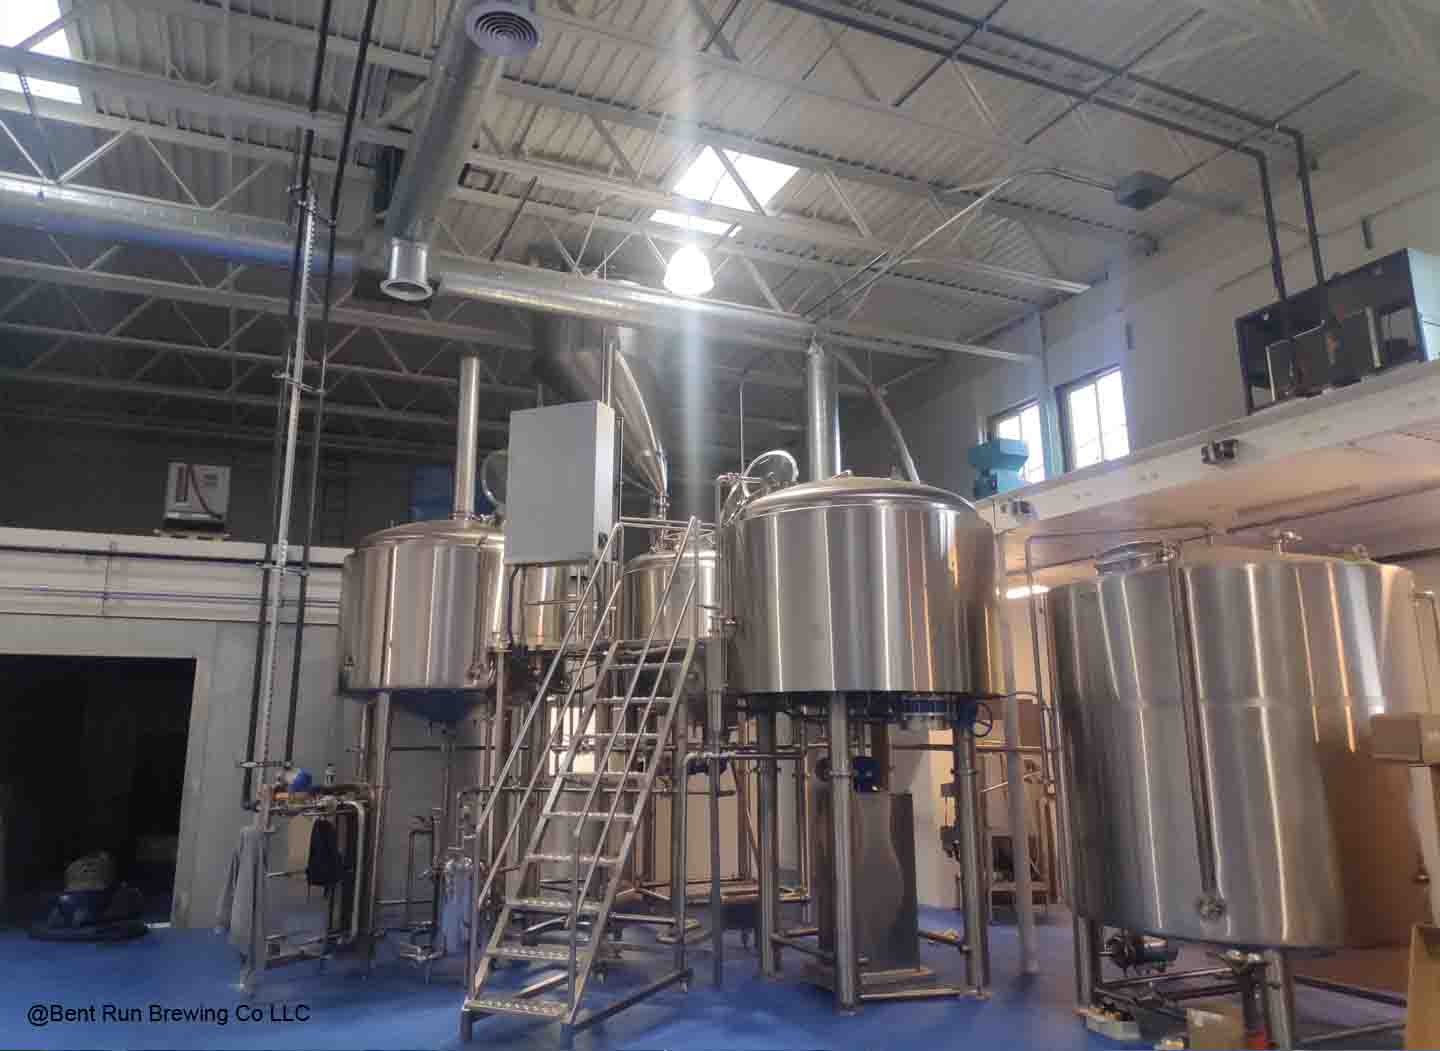 <b>You Think You Want to Open a Brewery</b>